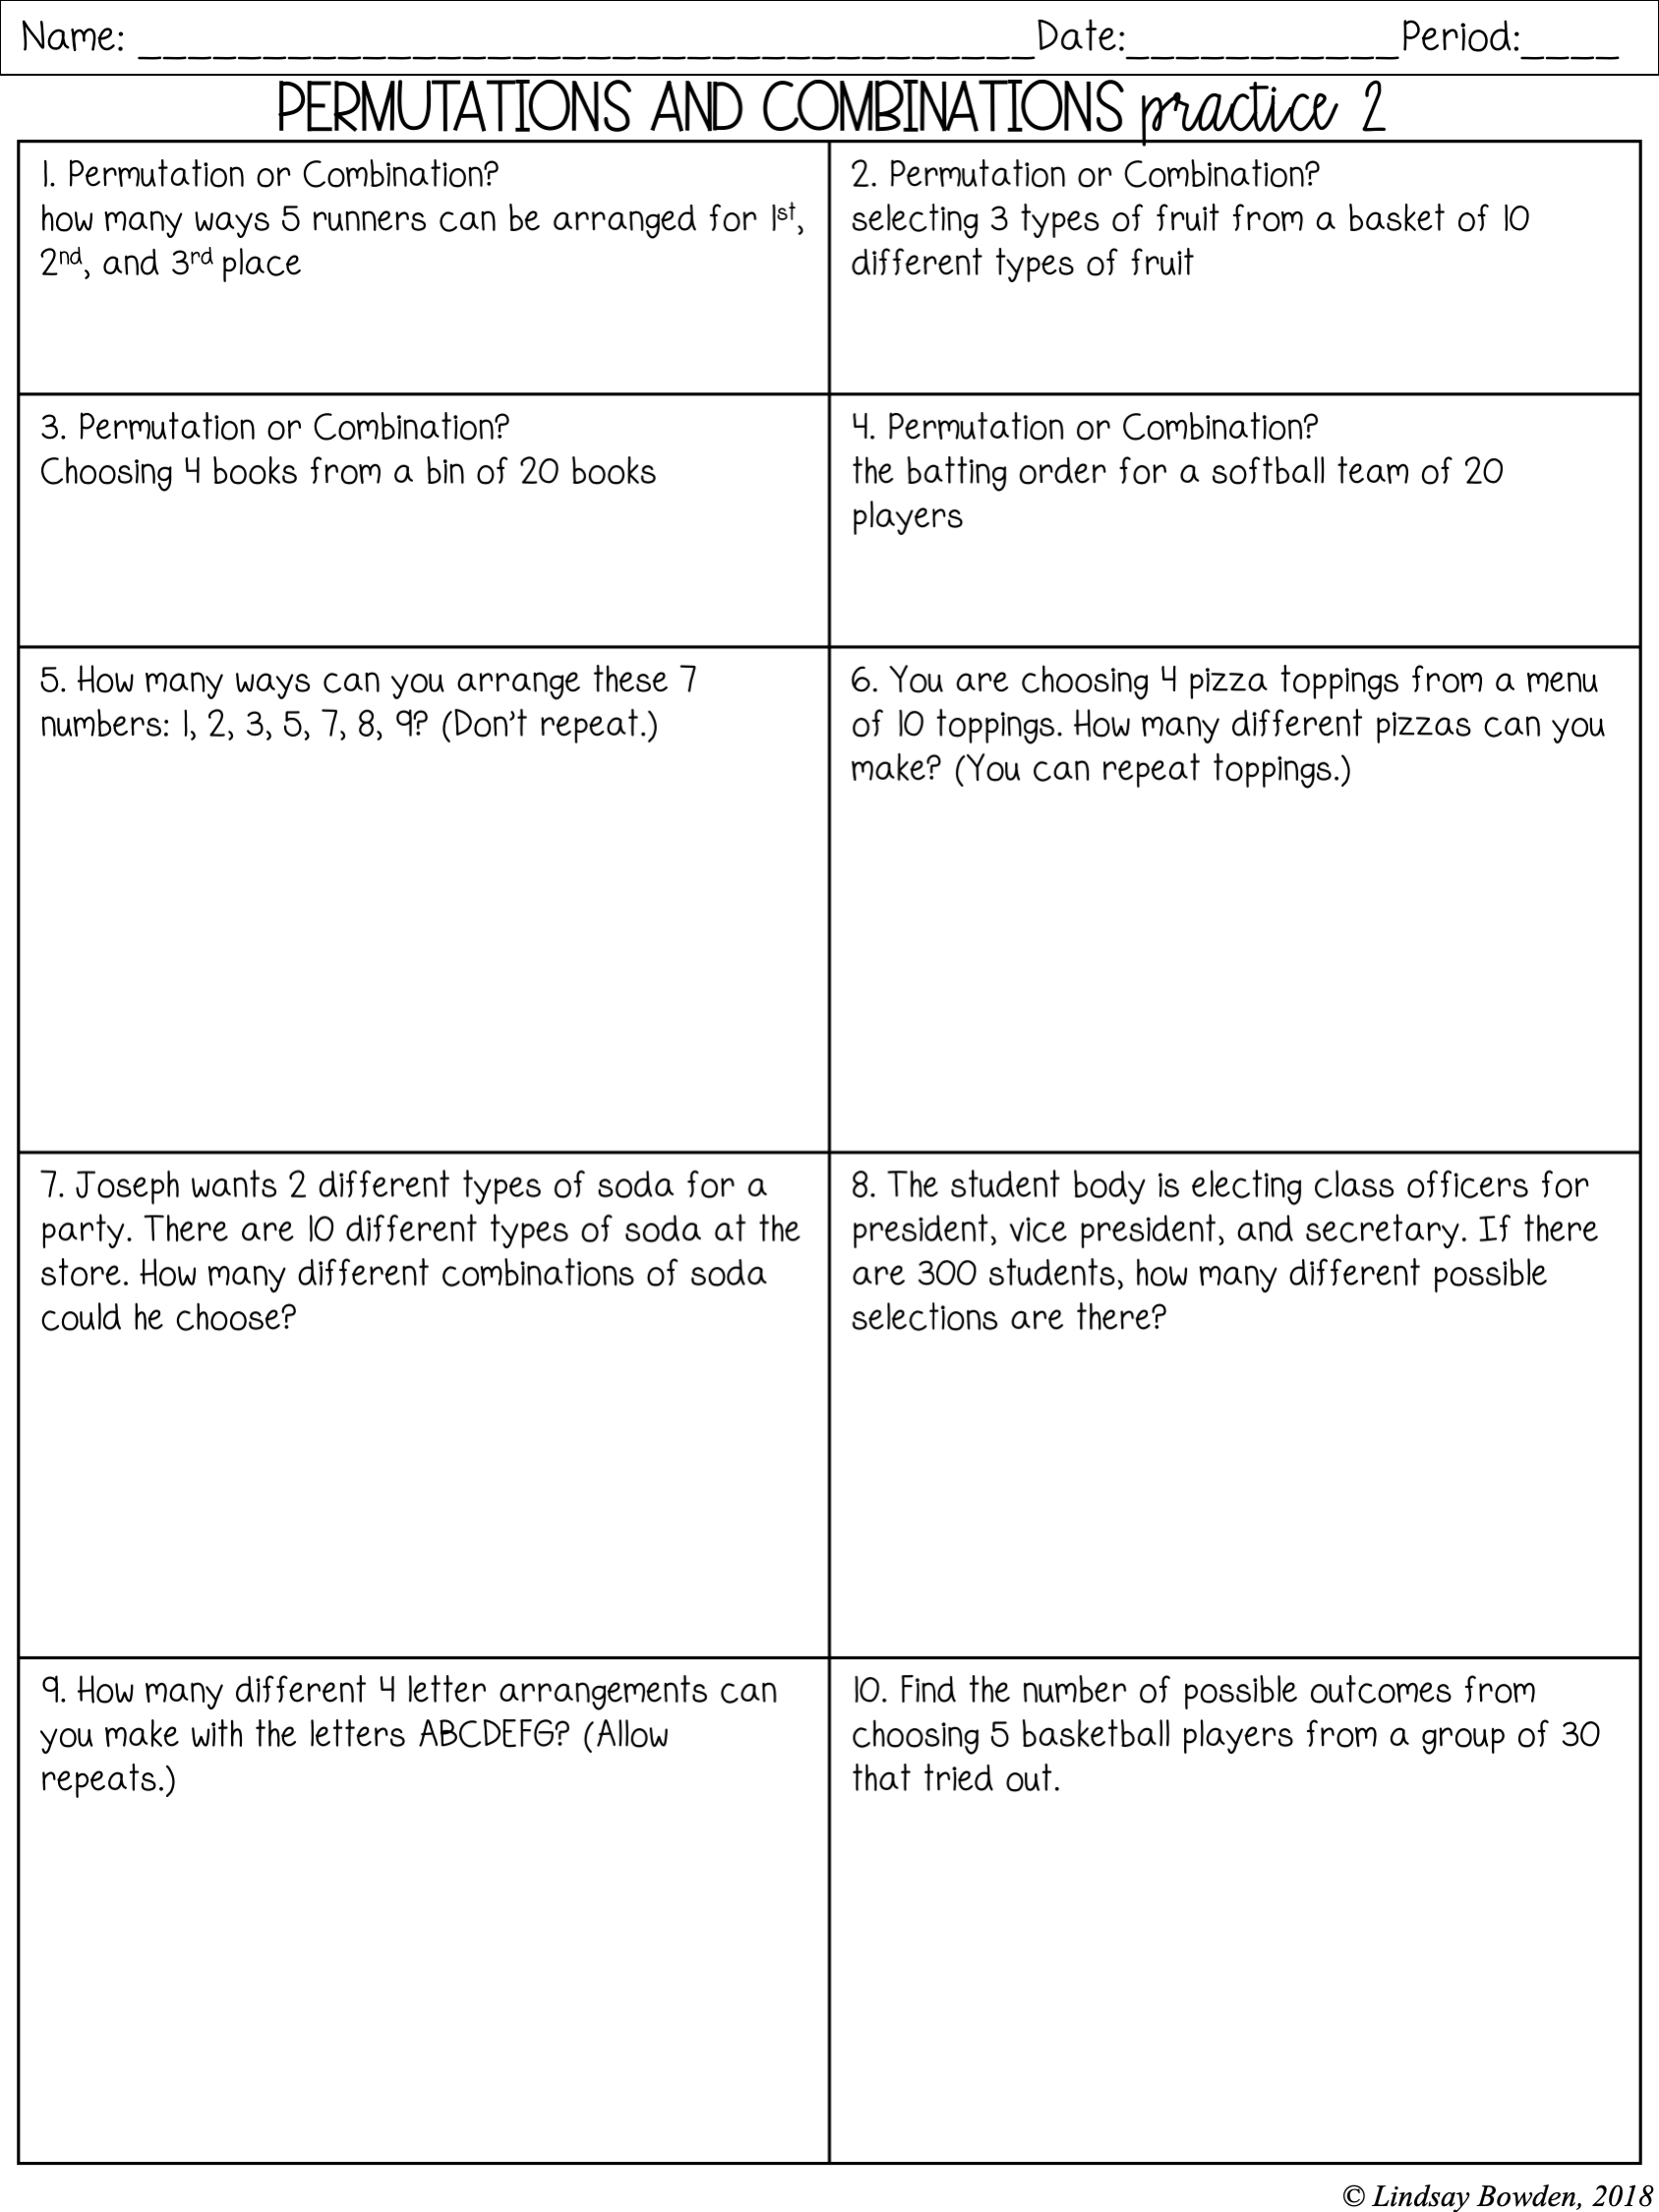 Permutations and Combinations Notes and Worksheets - Lindsay Bowden Pertaining To Combinations And Permutations Worksheet